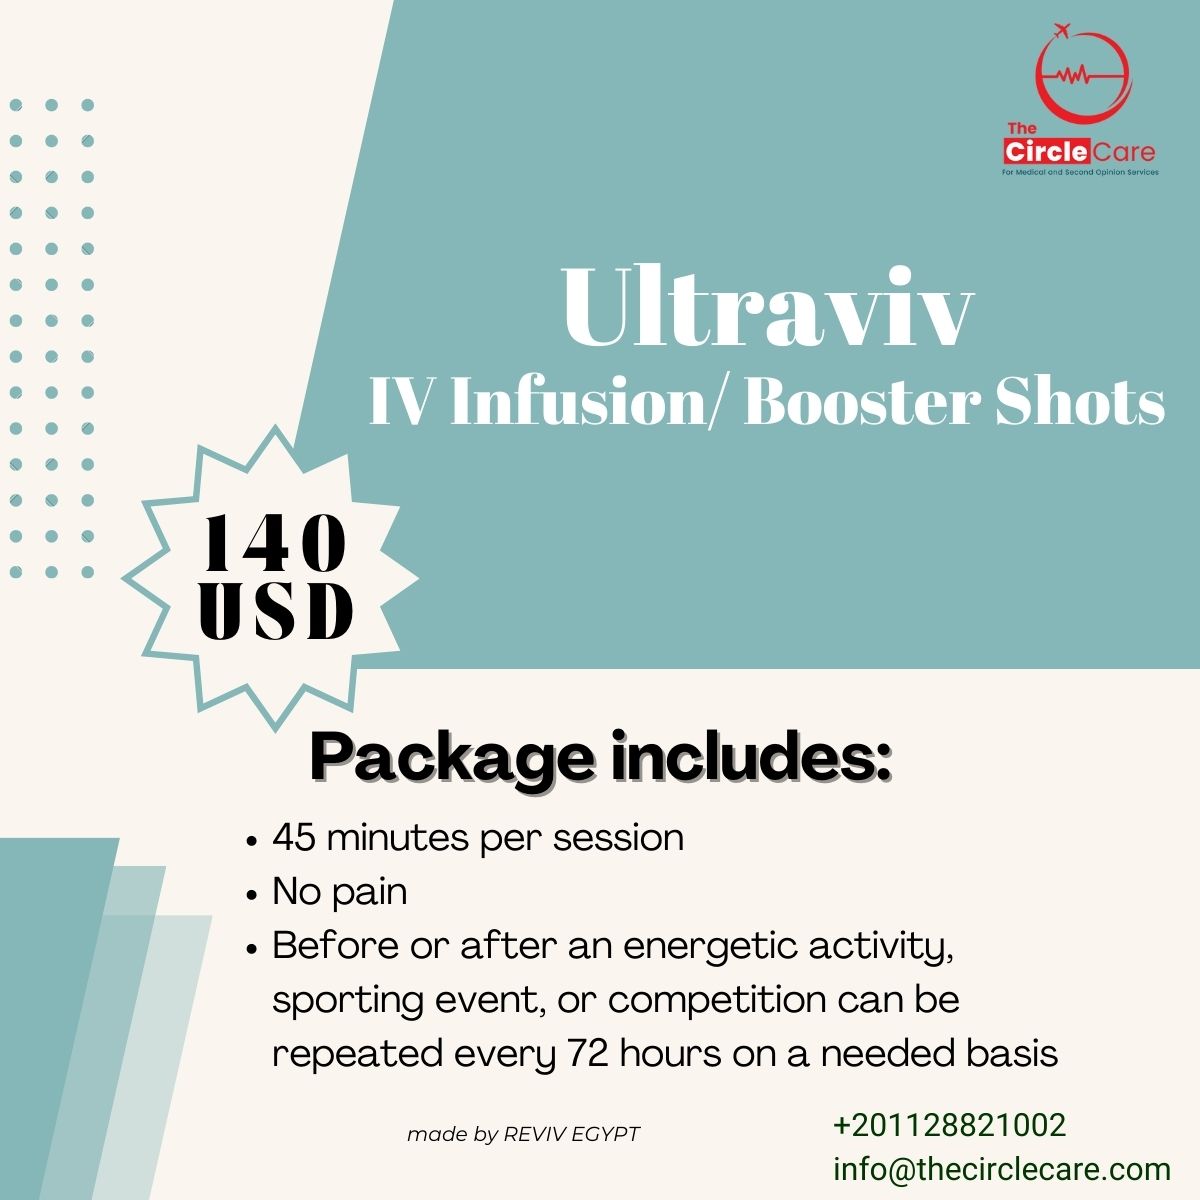 Ultraviv IV Infusion_ Booster Shots